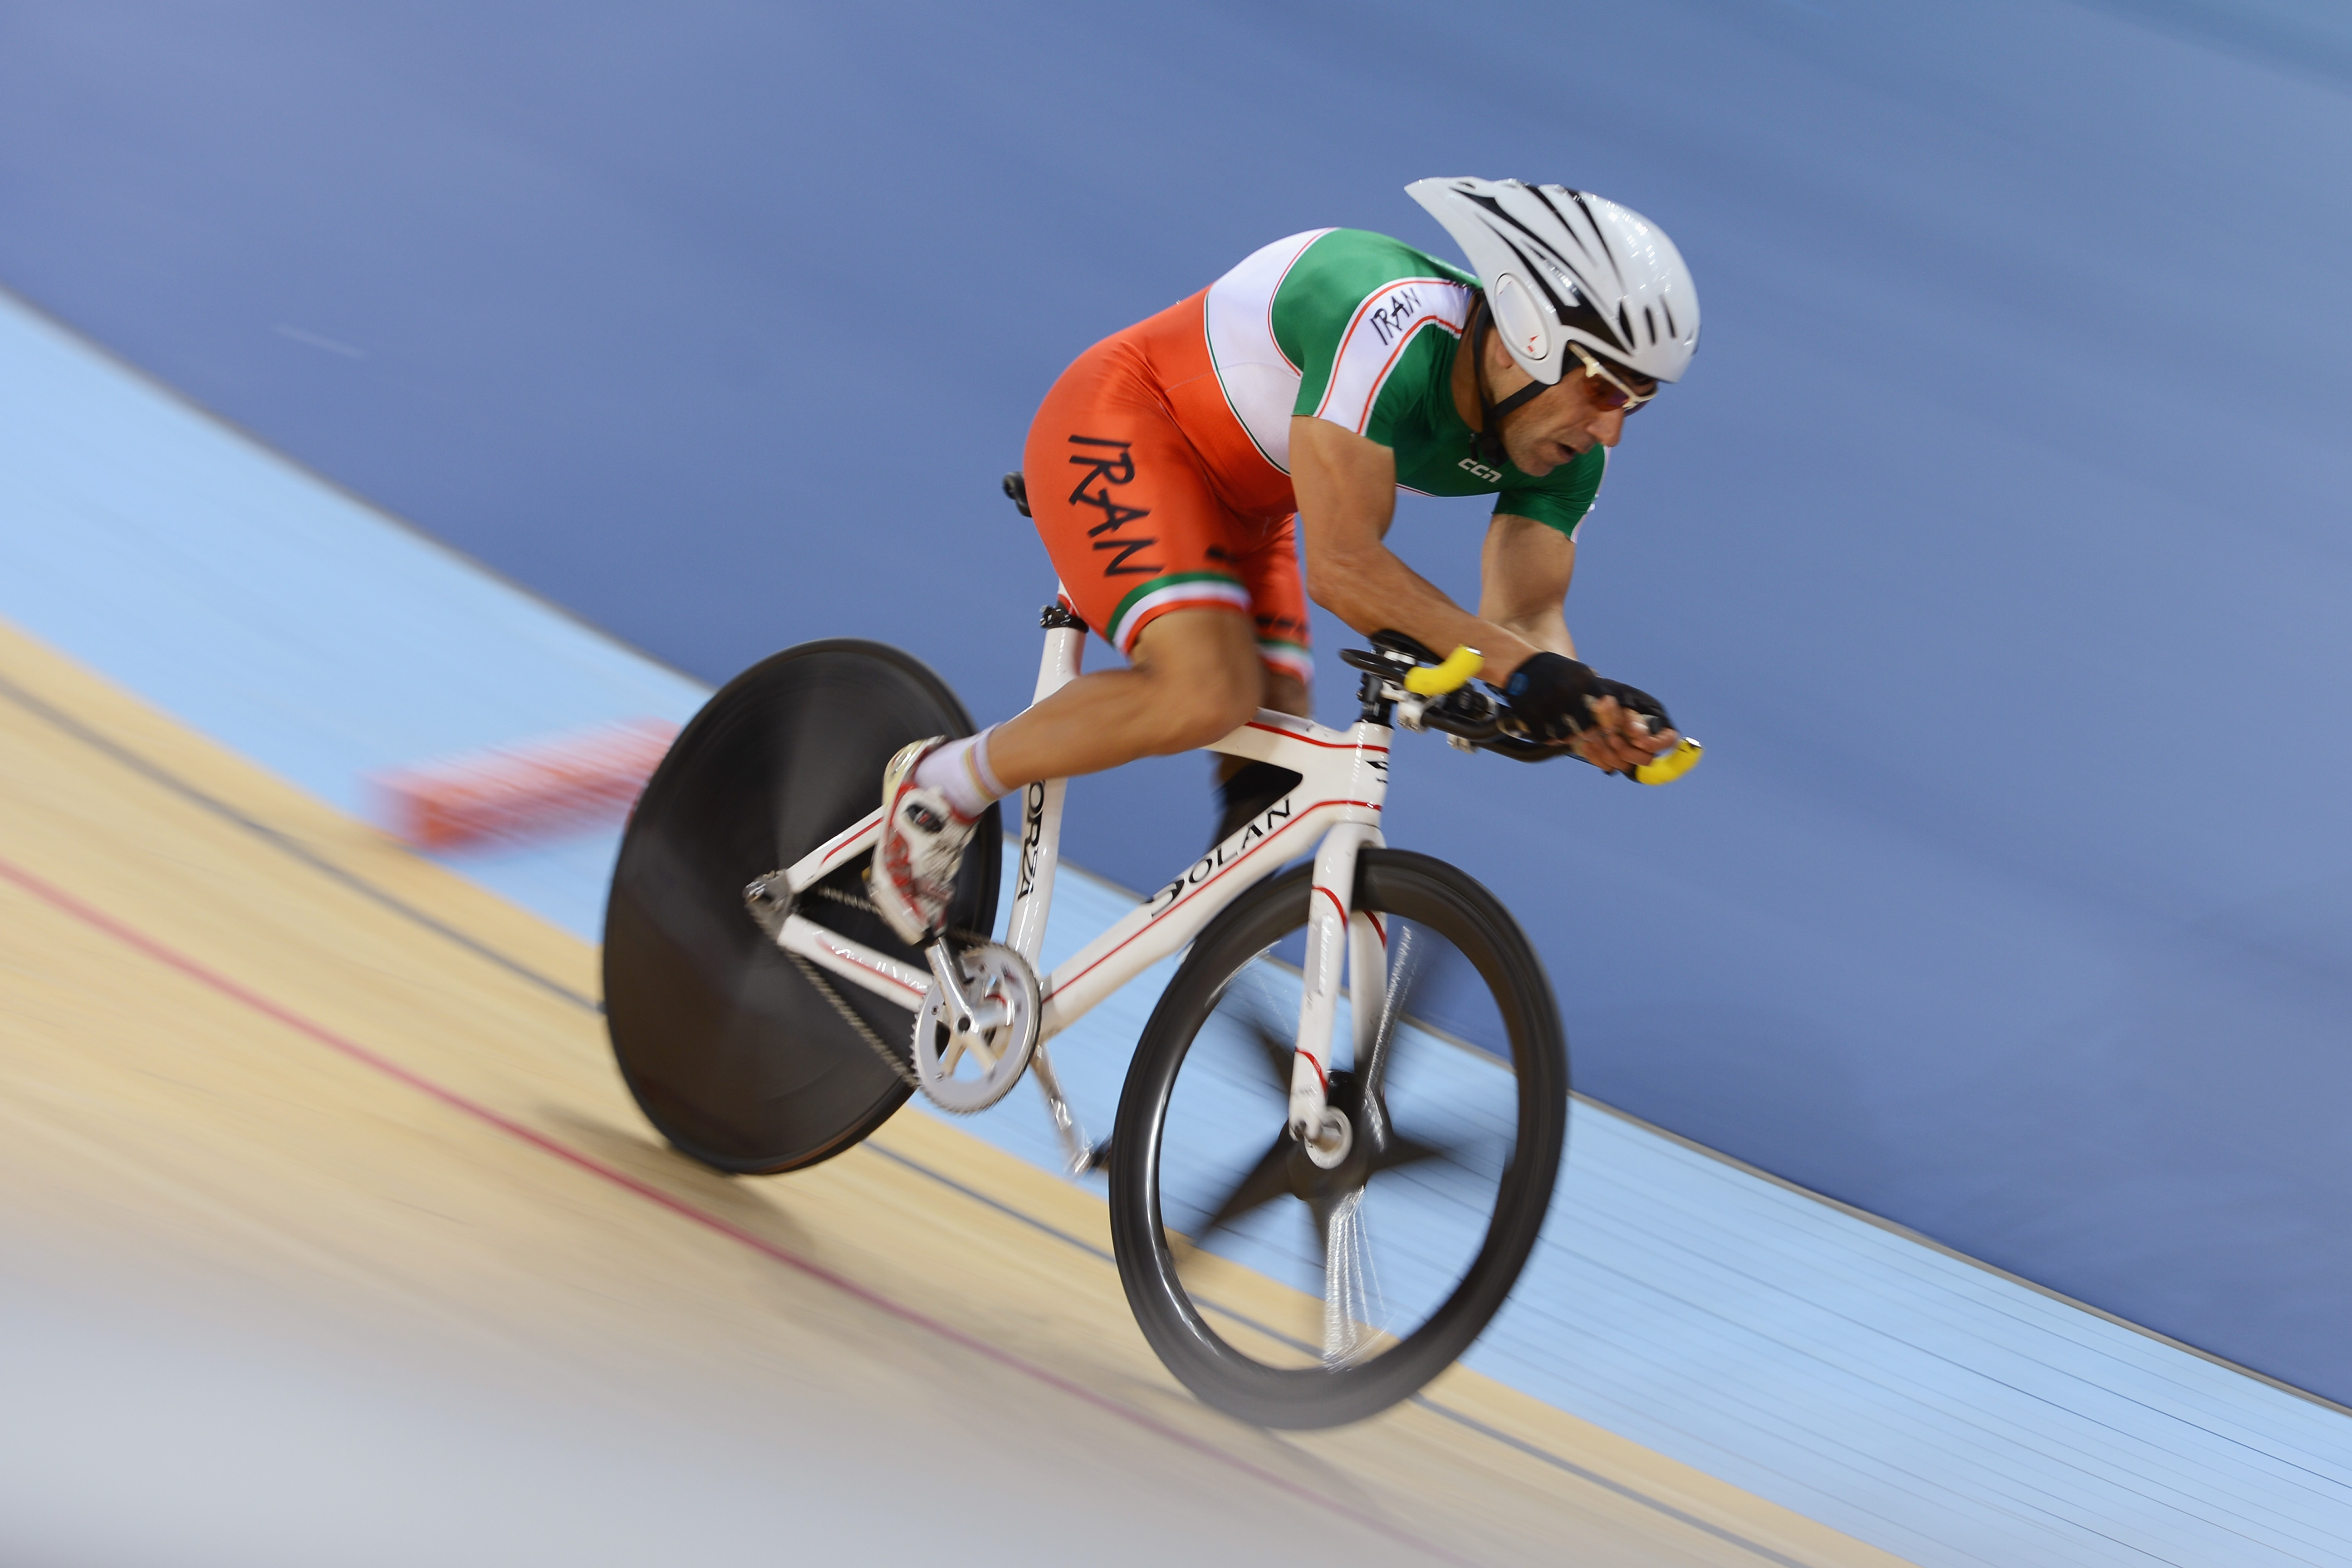 Paralympics 2016 | Iranian Cyclist dies in tragic accident